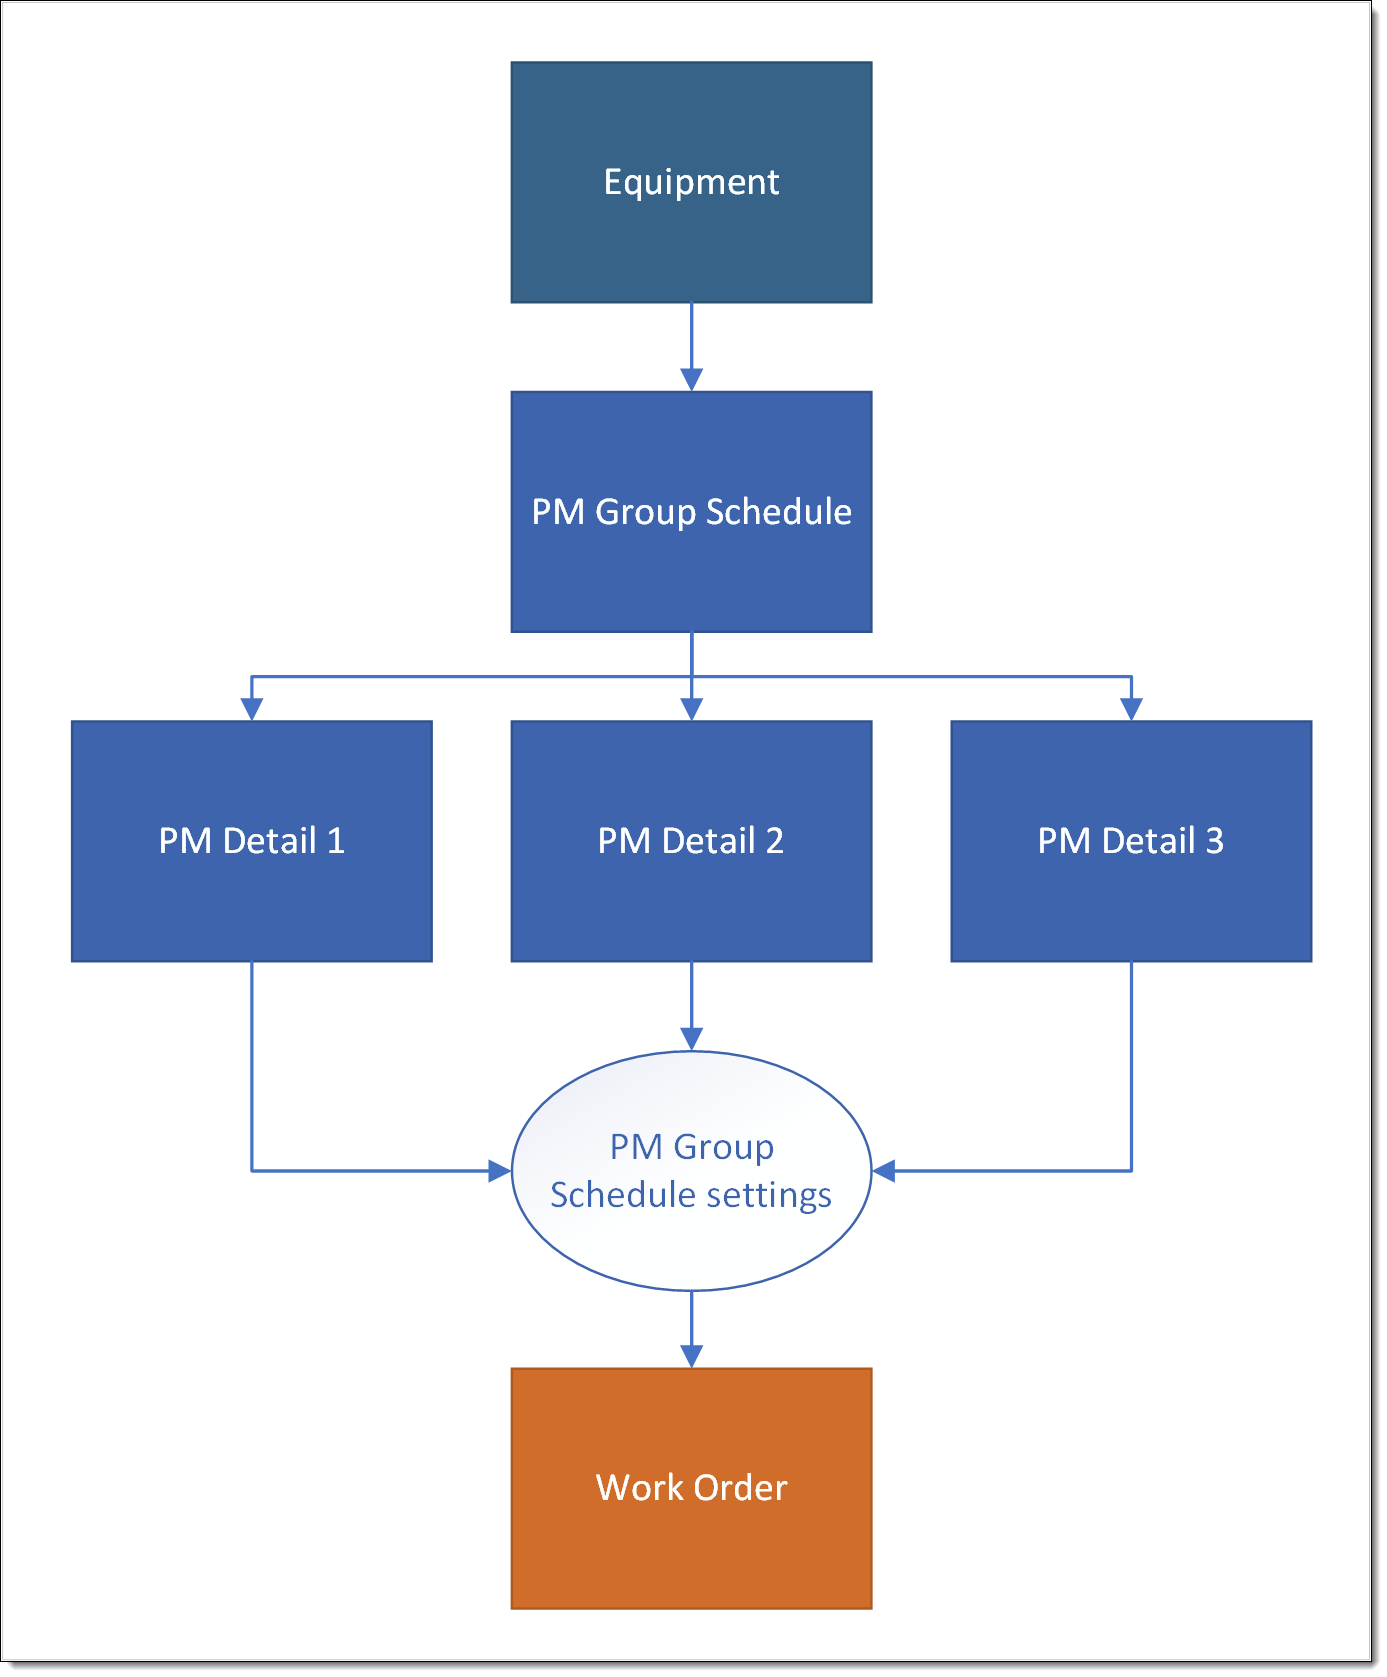 Flowchart showing how a group schedule decides on which PM Detail to use to create a work order